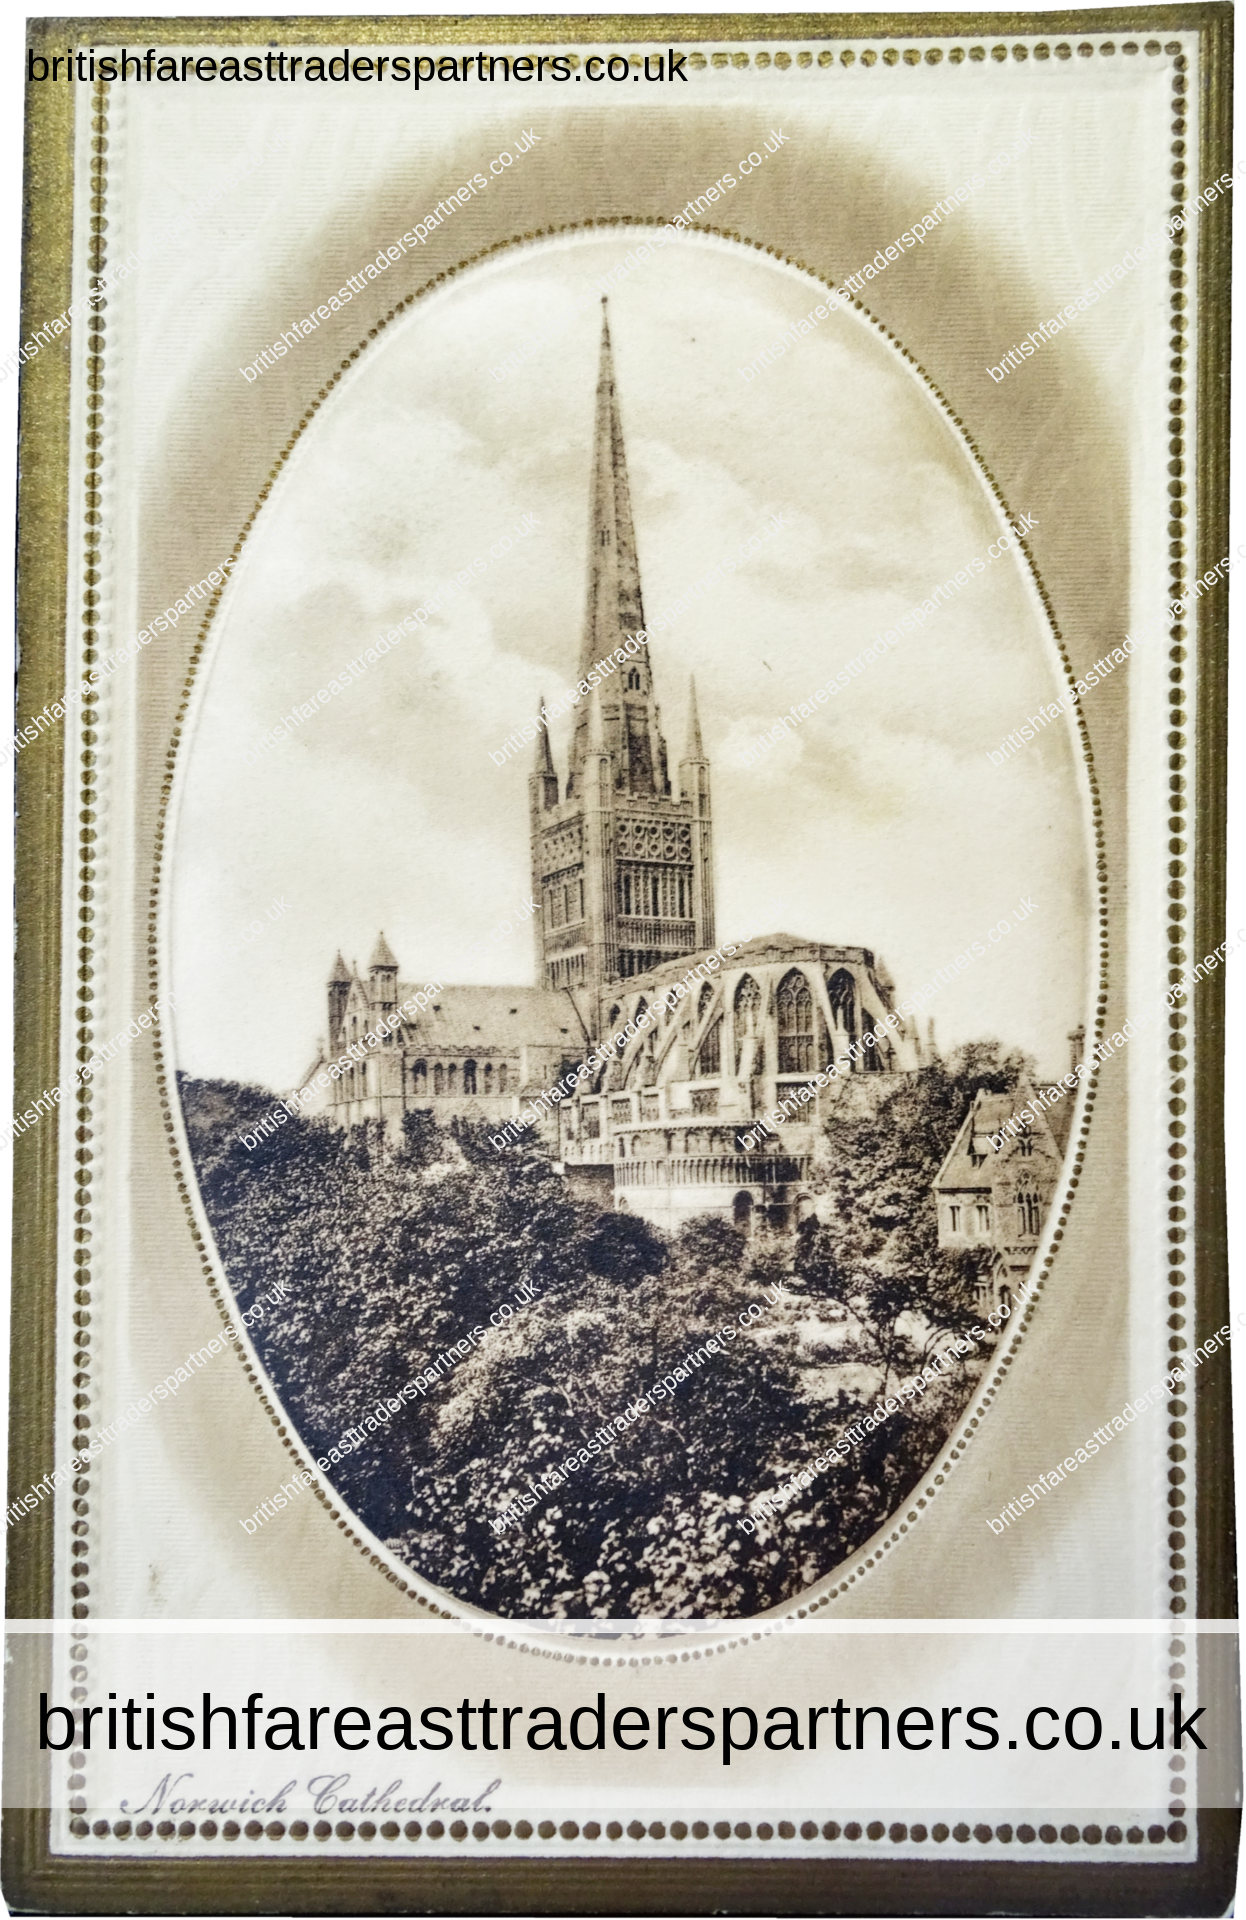 VINTAGE RAPHAEL TUCK & SONS “GOLD FRAMED SEPIA” POSTCARD NO. 1309 NORWICH CATHEDRAL , ENGLAND TOPOGRAPHICAL POSTCARD RAPHAEL TUCK & SONS | CATHEDRALS | BRITISH | HERITAGE | TOPOGRAPHY | HIGHLY COLLECTABLE